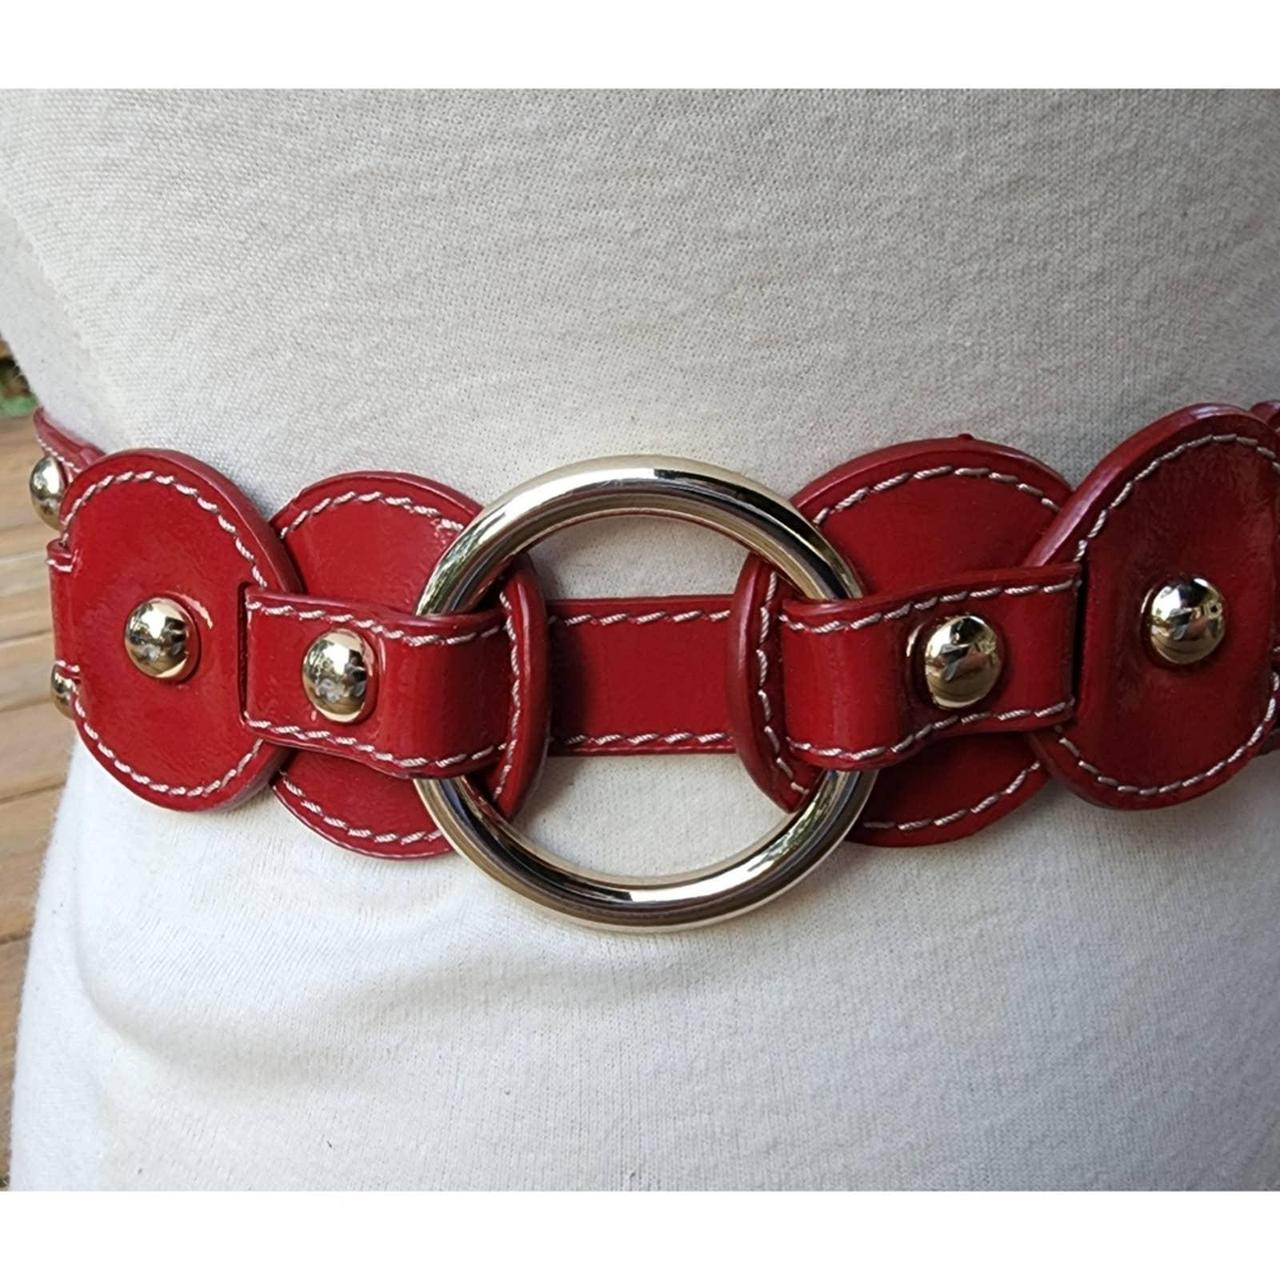 American Vintage Women's Red and Gold Belt (3)